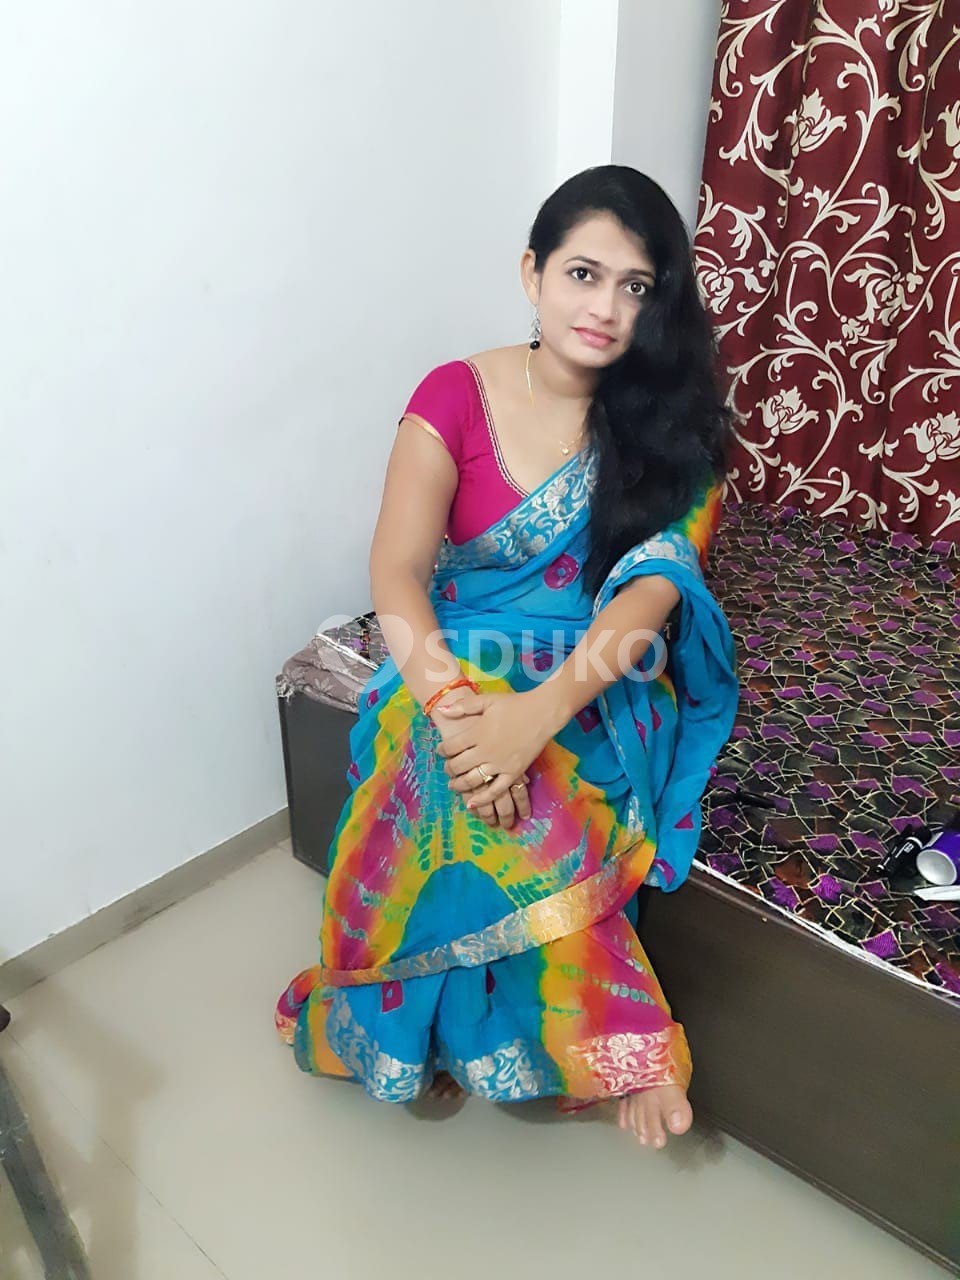 Ooty myself,, Mallika,,,TODAY LOW PRICE 100% SAFE AND SECURE GENUINE CALL GIRL AFFORDABLE PRICE CALL NOW